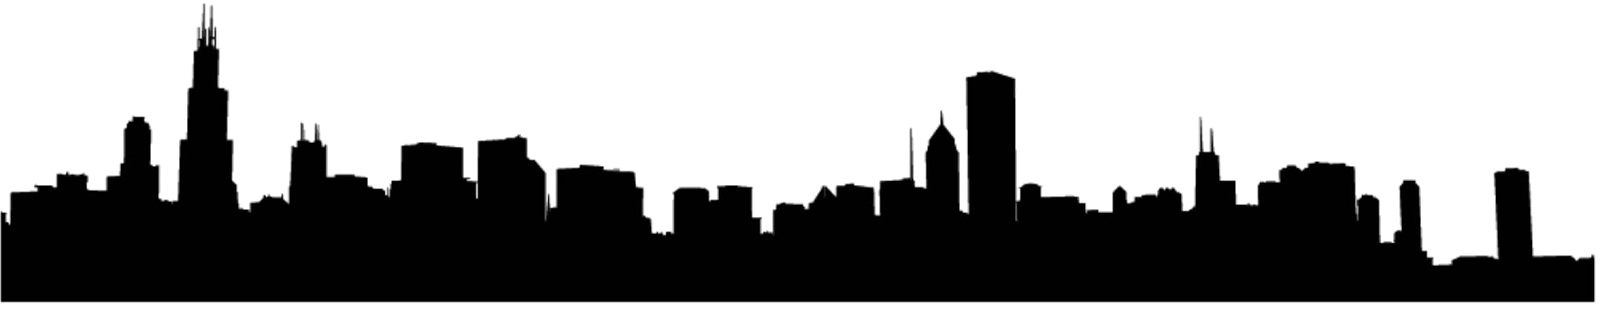 Houston Skyline Outline | Free download on ClipArtMag